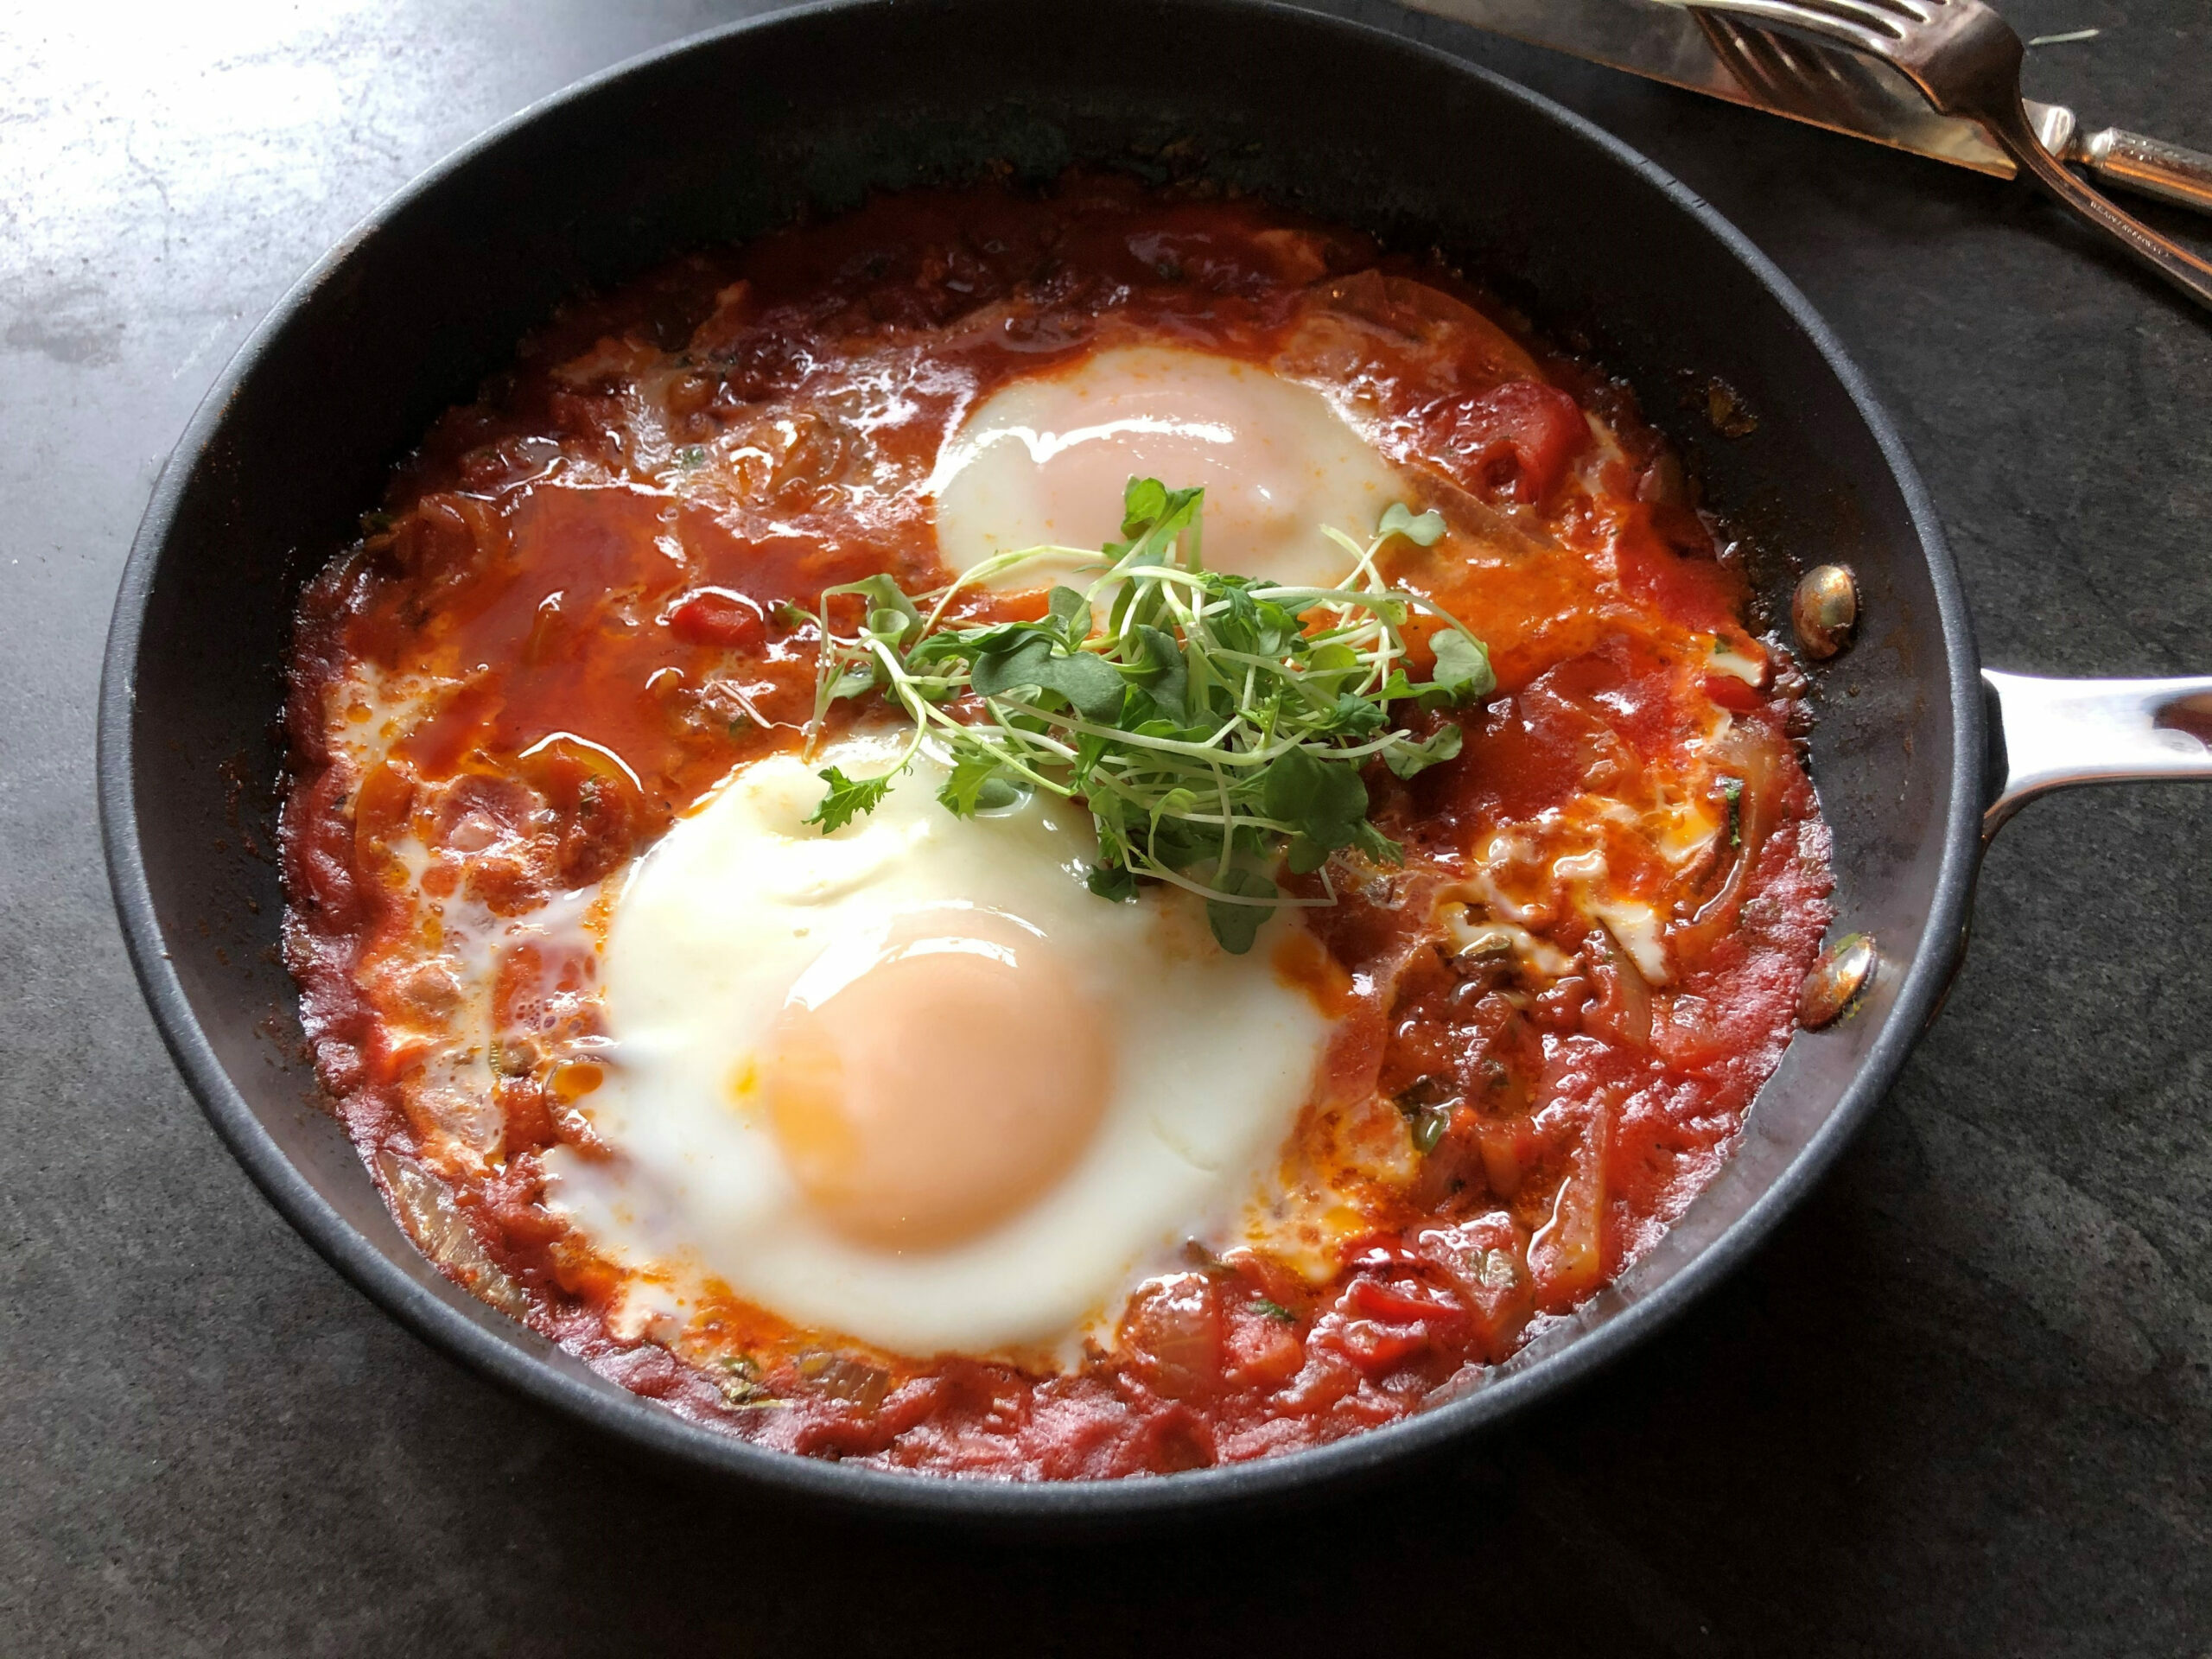 Two eggs nestled in a tomato based sauce in a skillet garnished with greens